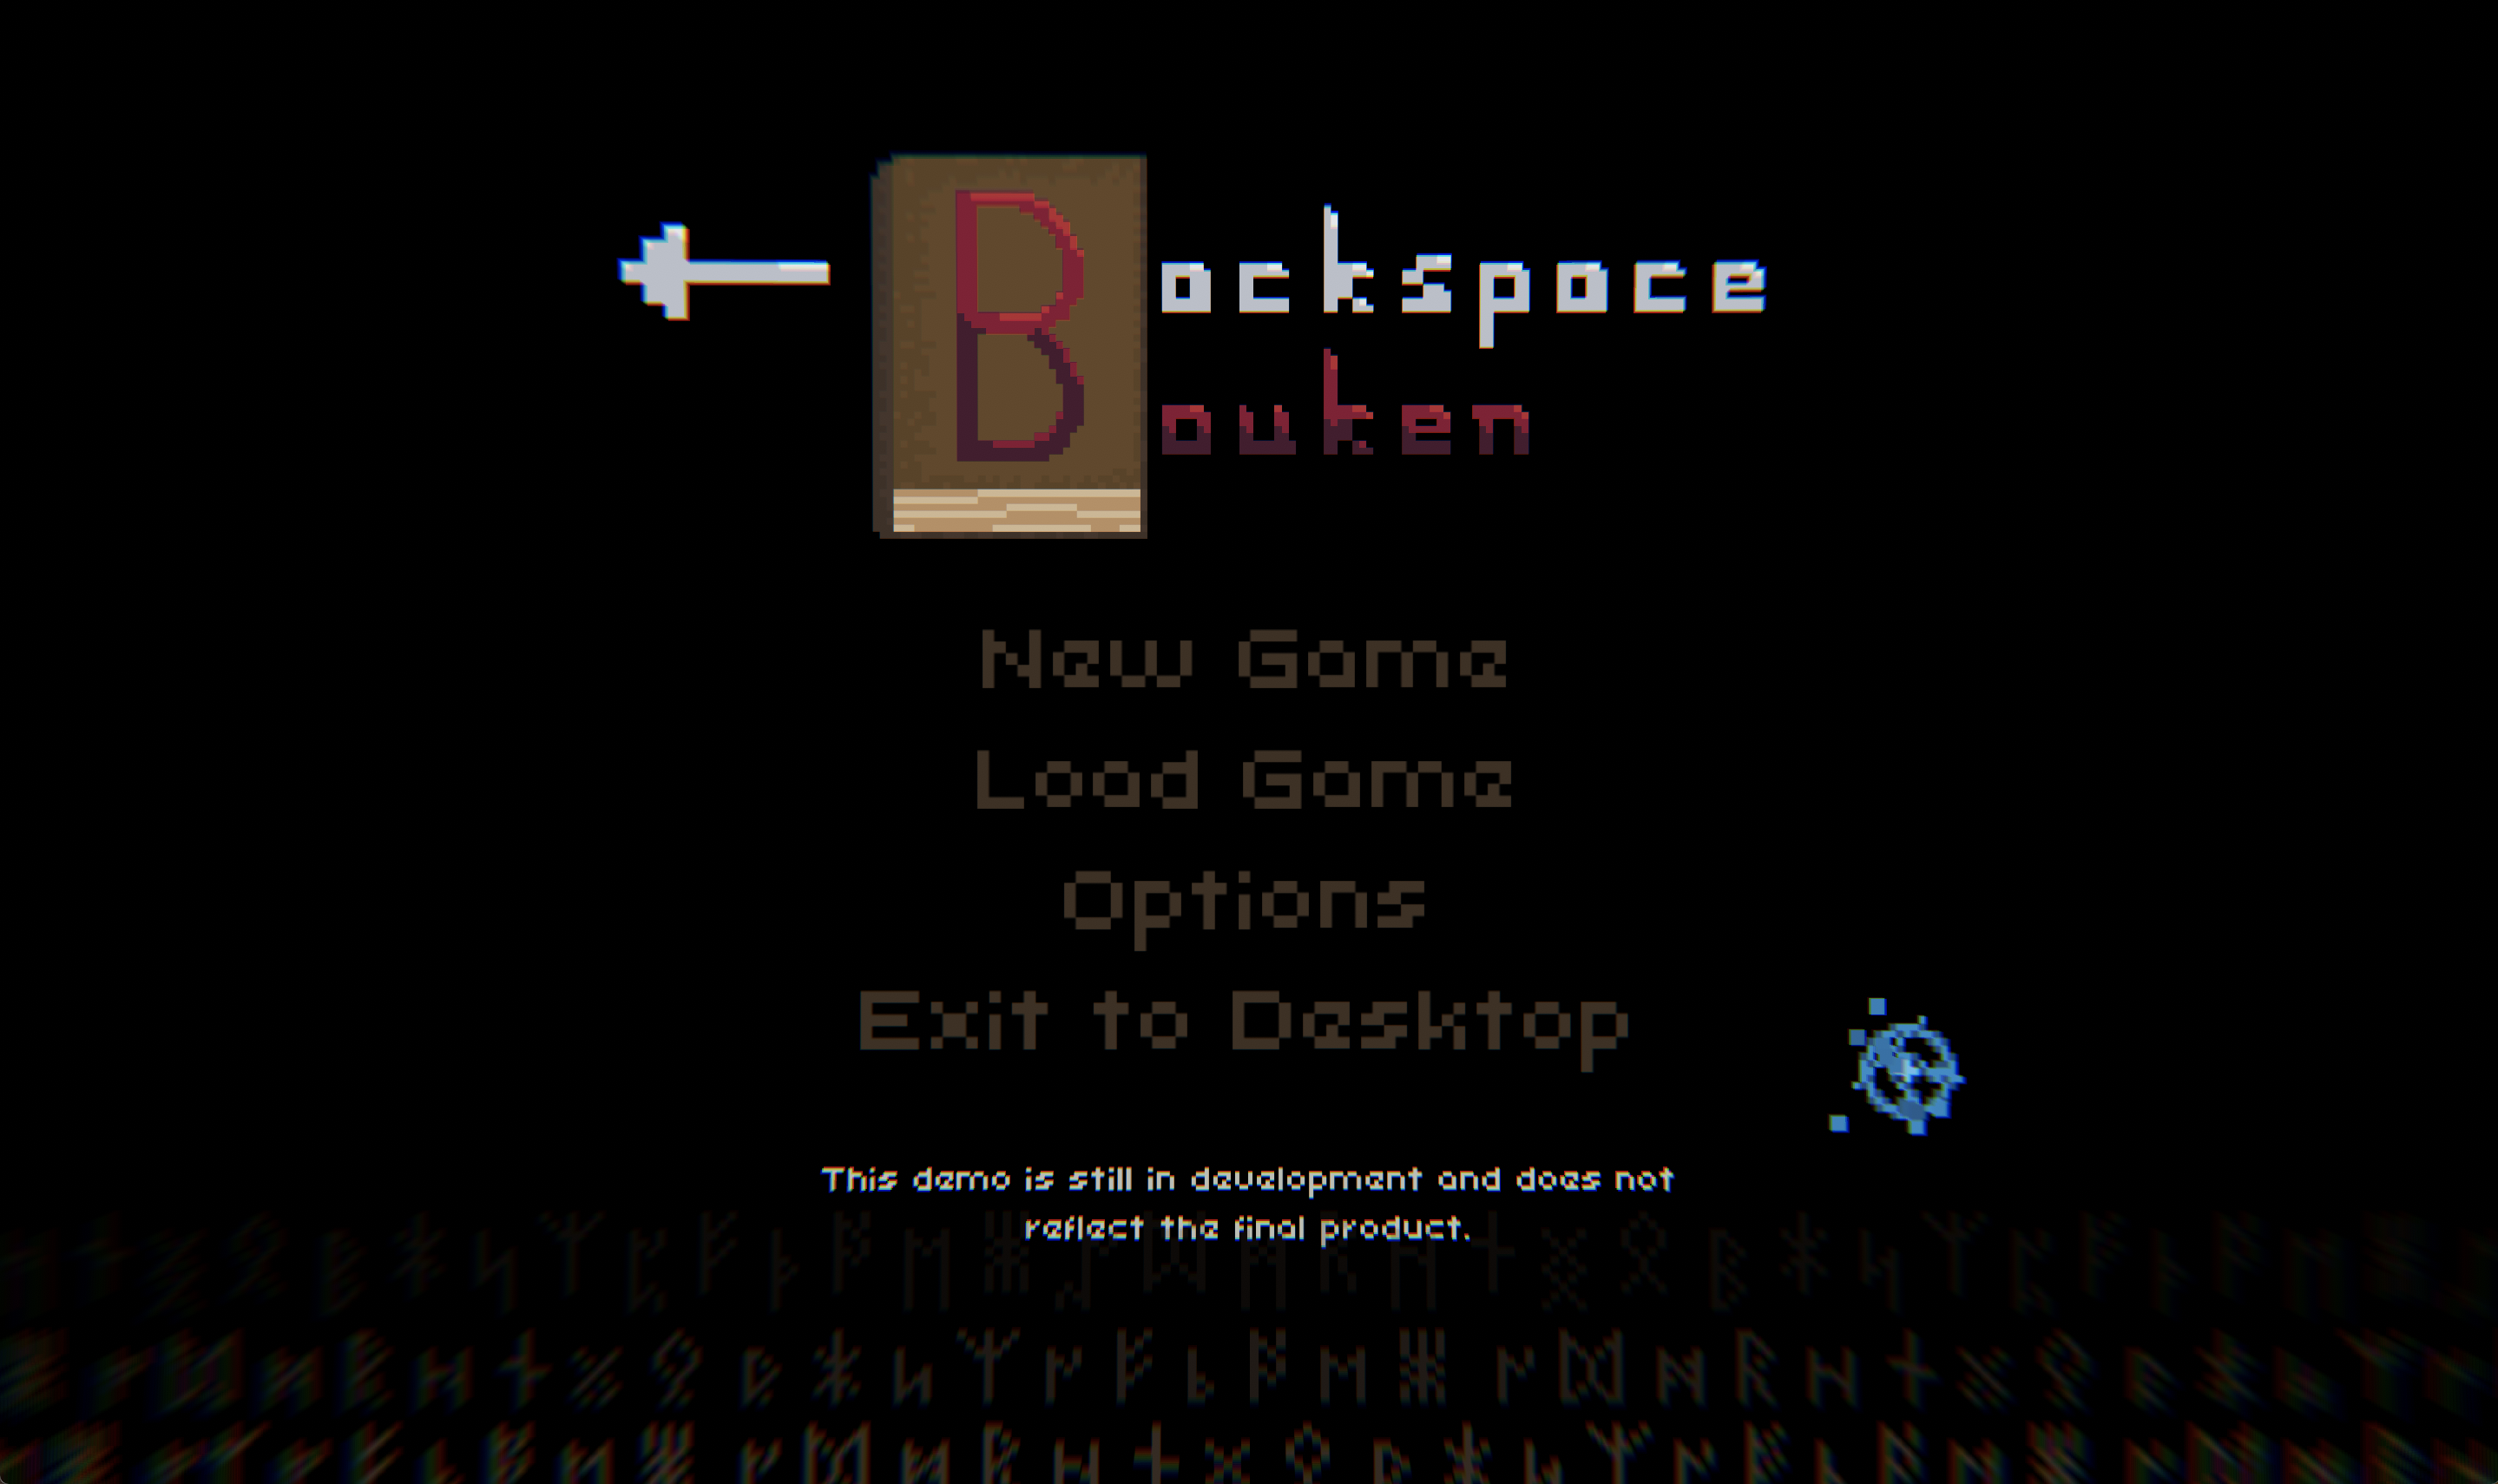 Title screen showing options: NEW GAME, LOAD GAME, OPTIONS, EXIT TO DESKTOP